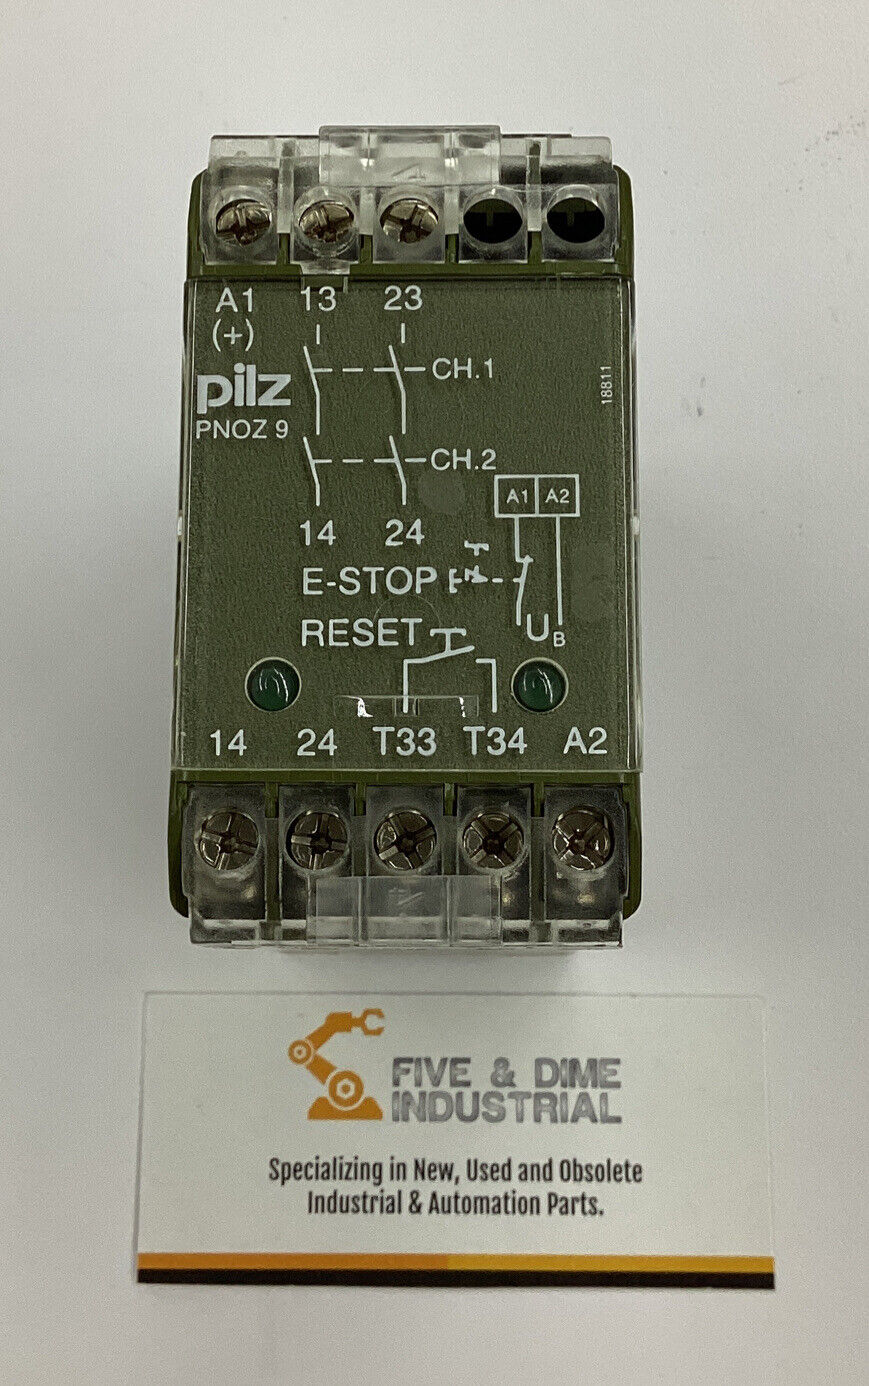 Pilz PNOZ 9 24VDC 2S Emergency Stop Relay 474780 ***Pre-Owned*** (CL281)